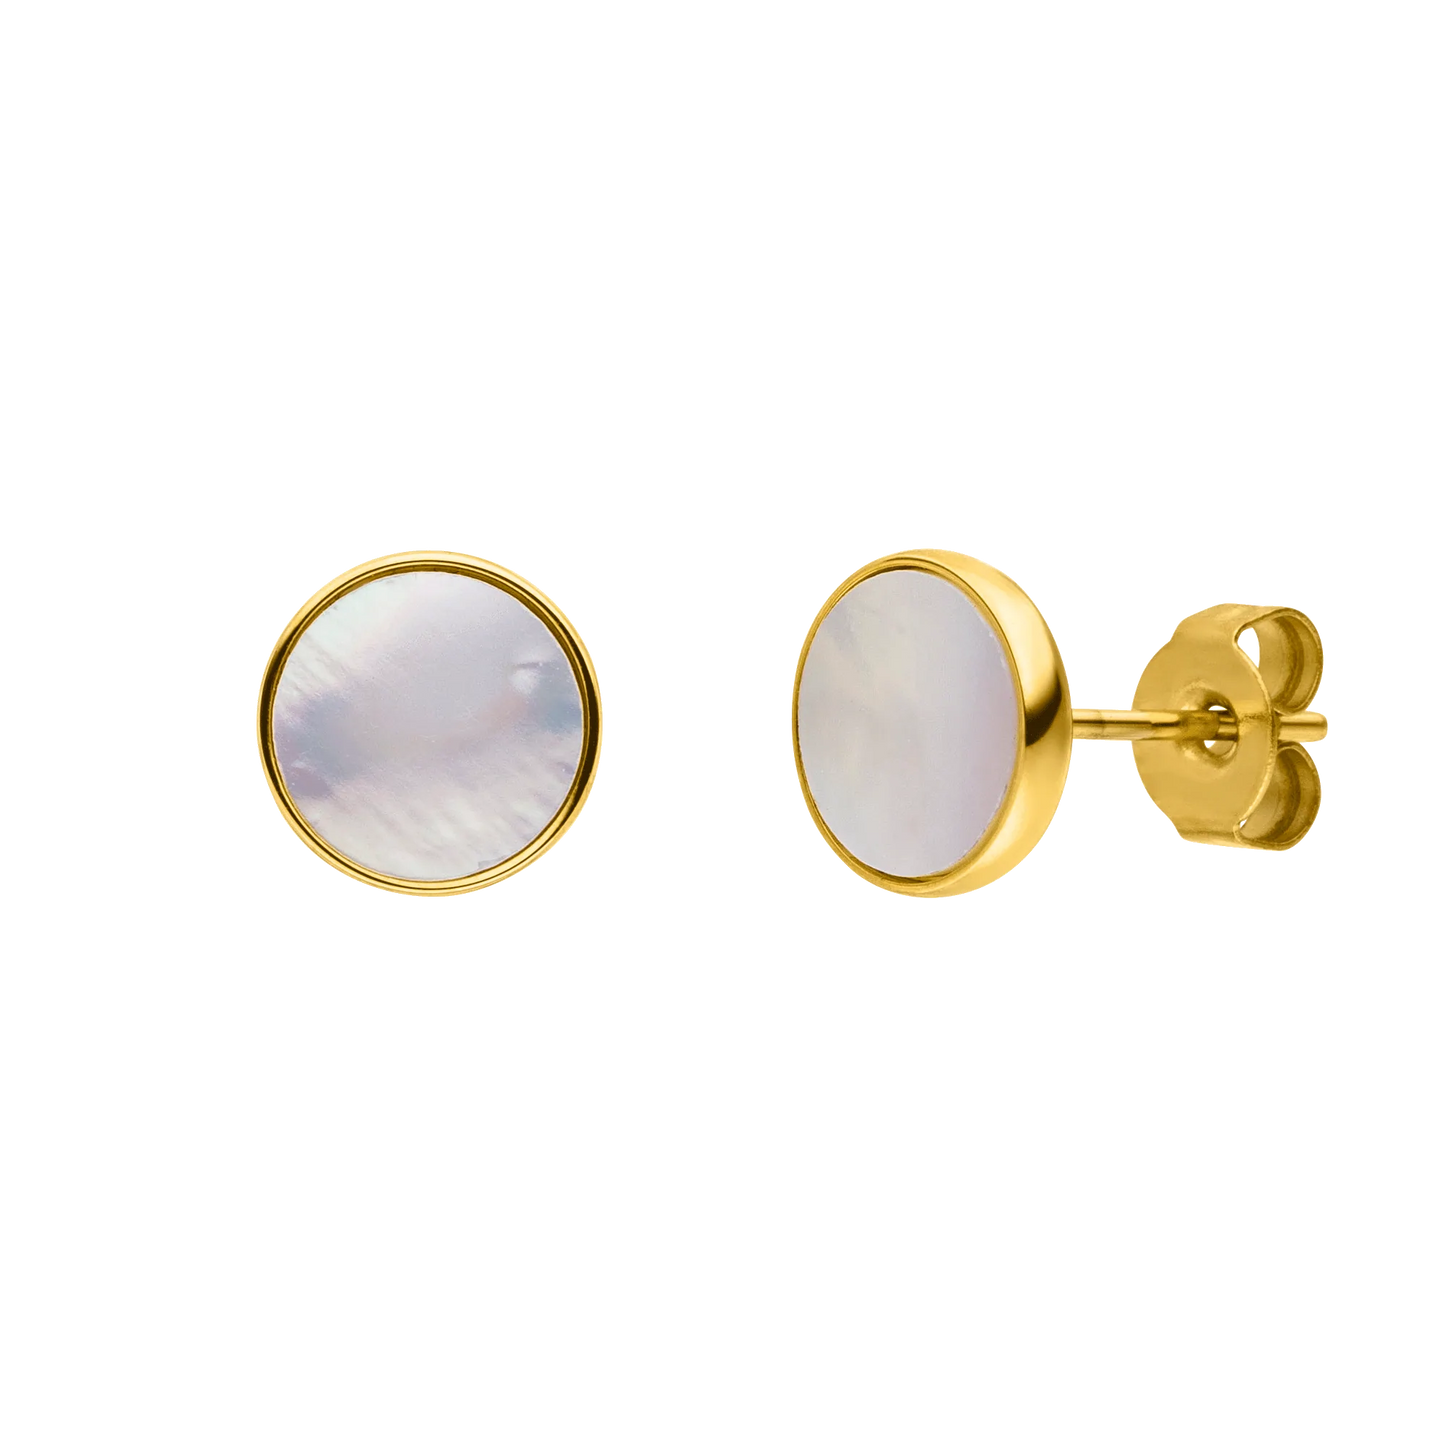 HOMME LA PEARLA | 14K Gold Stainless Steel 8MM Round White Mother of Pearl Shell Stud Earrings